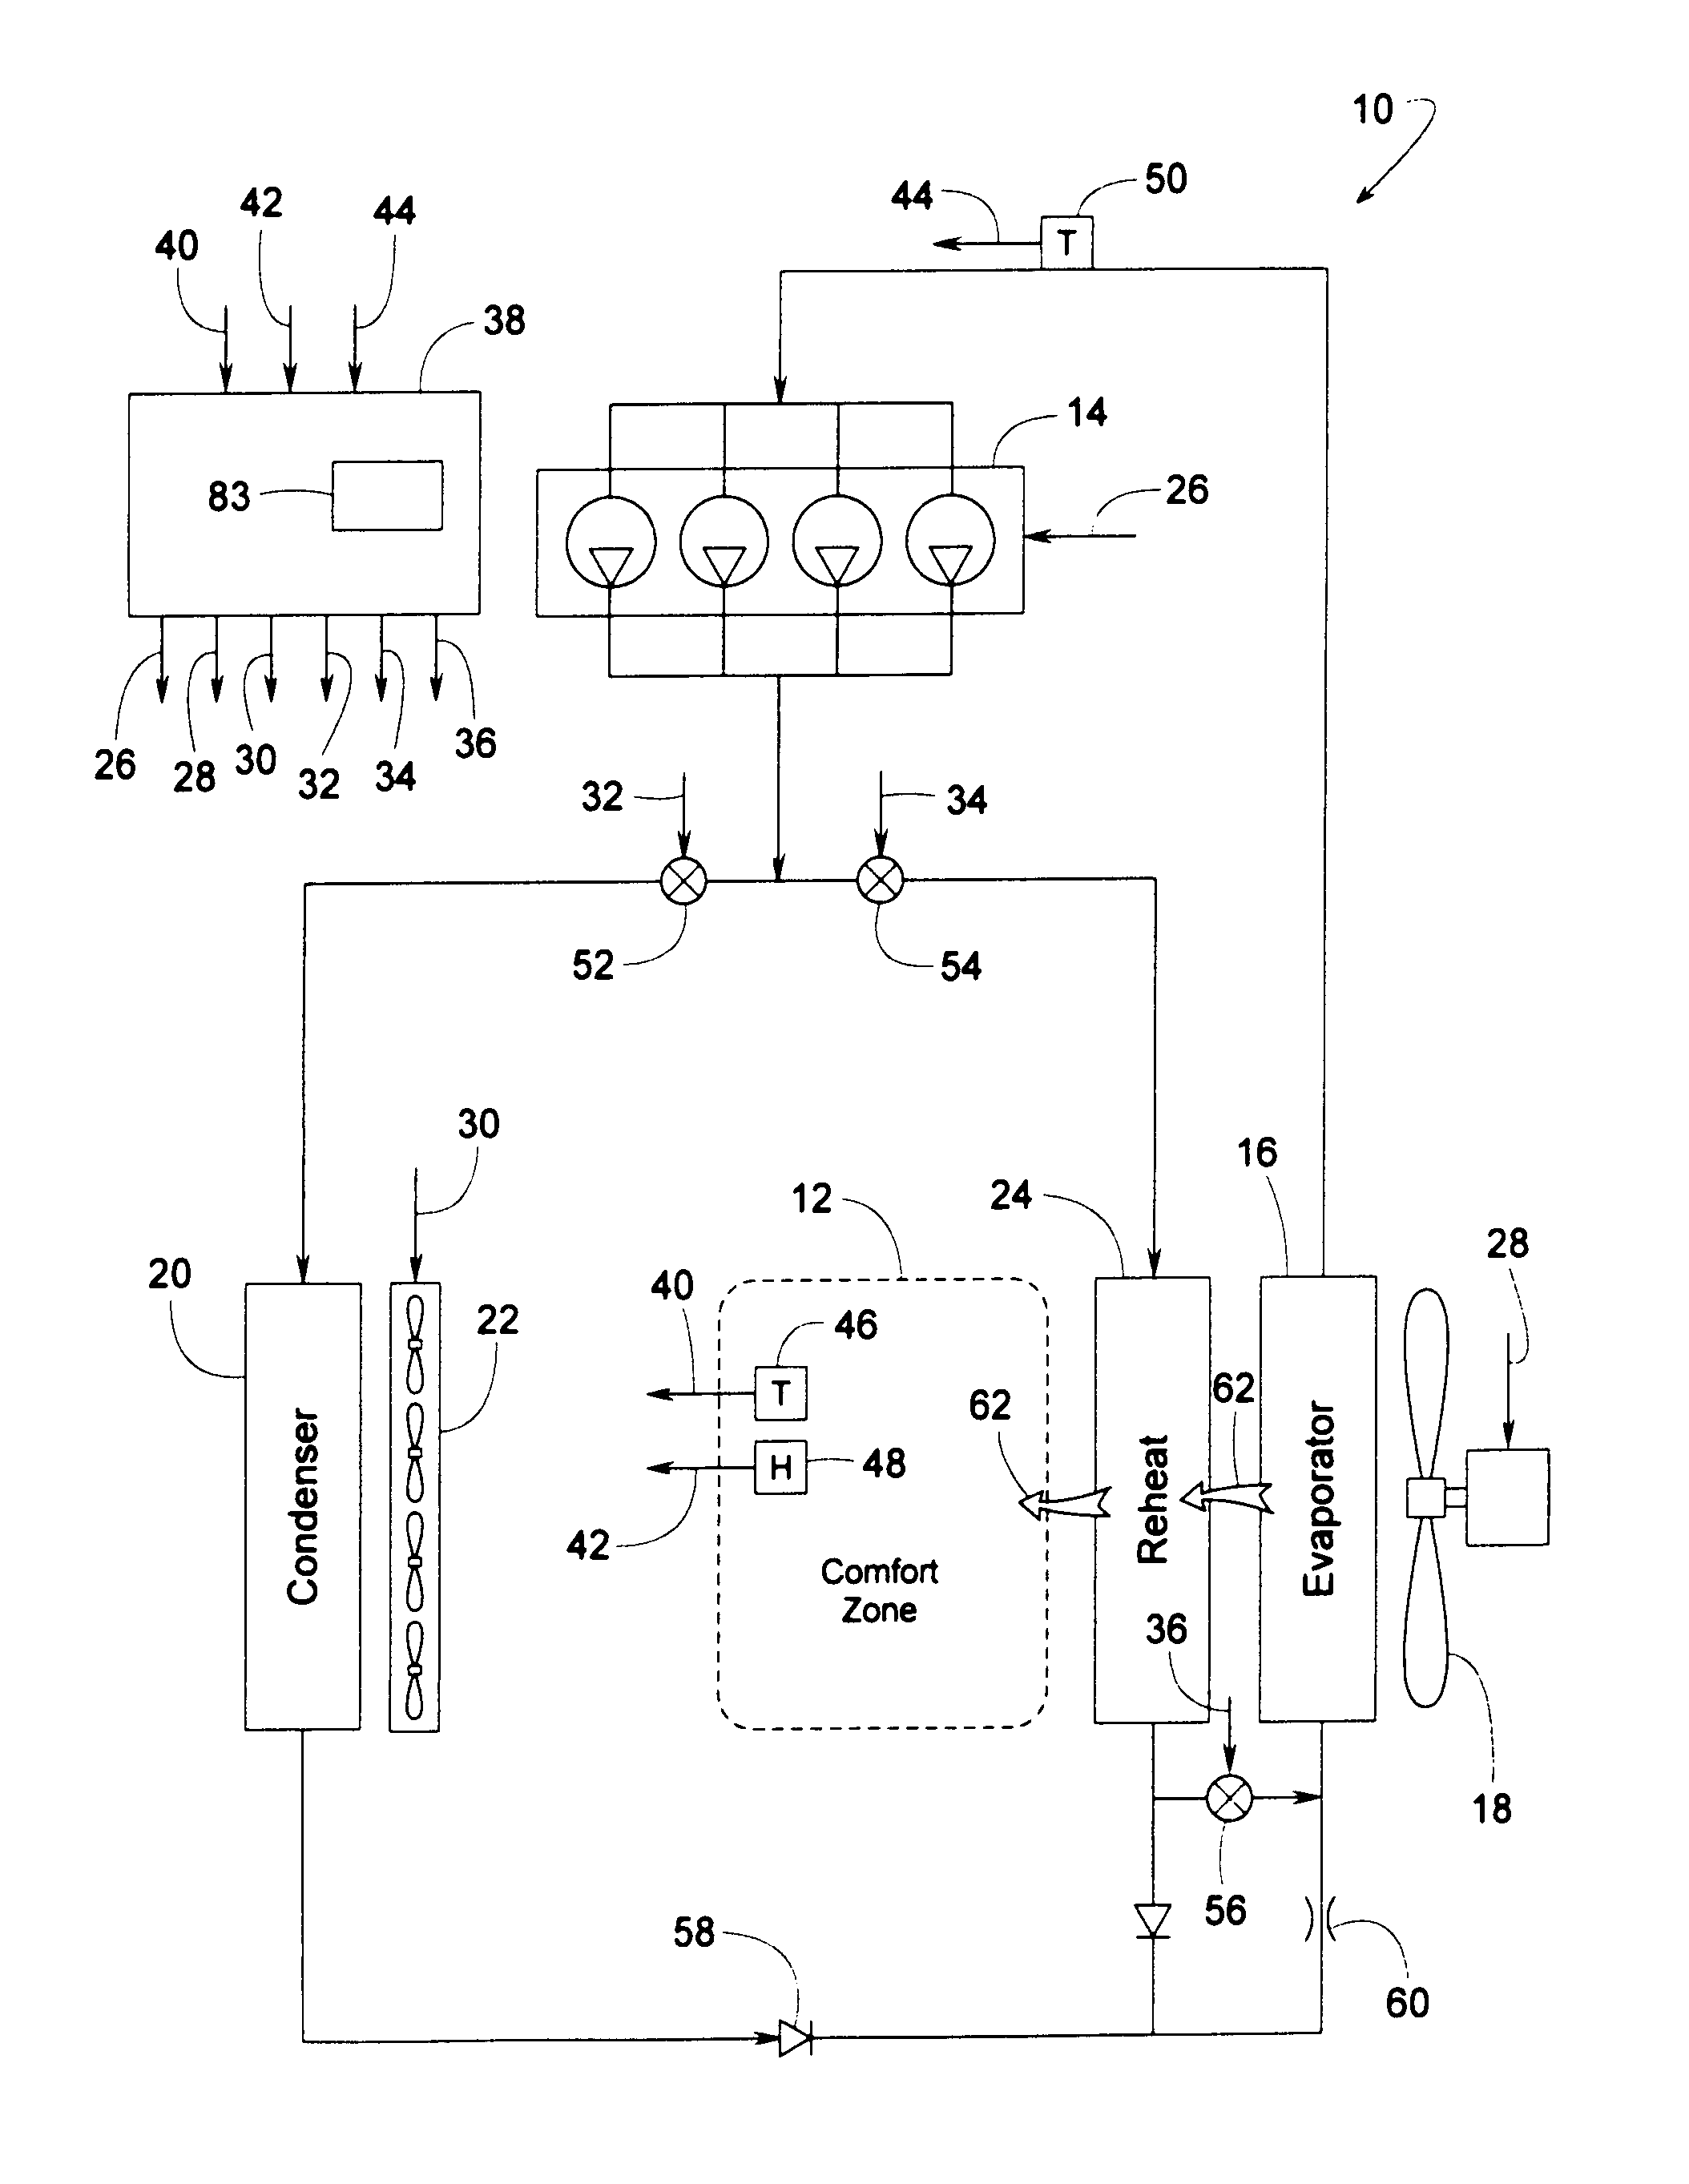 Control scheme for coordinating variable capacity components of a refrigerant system